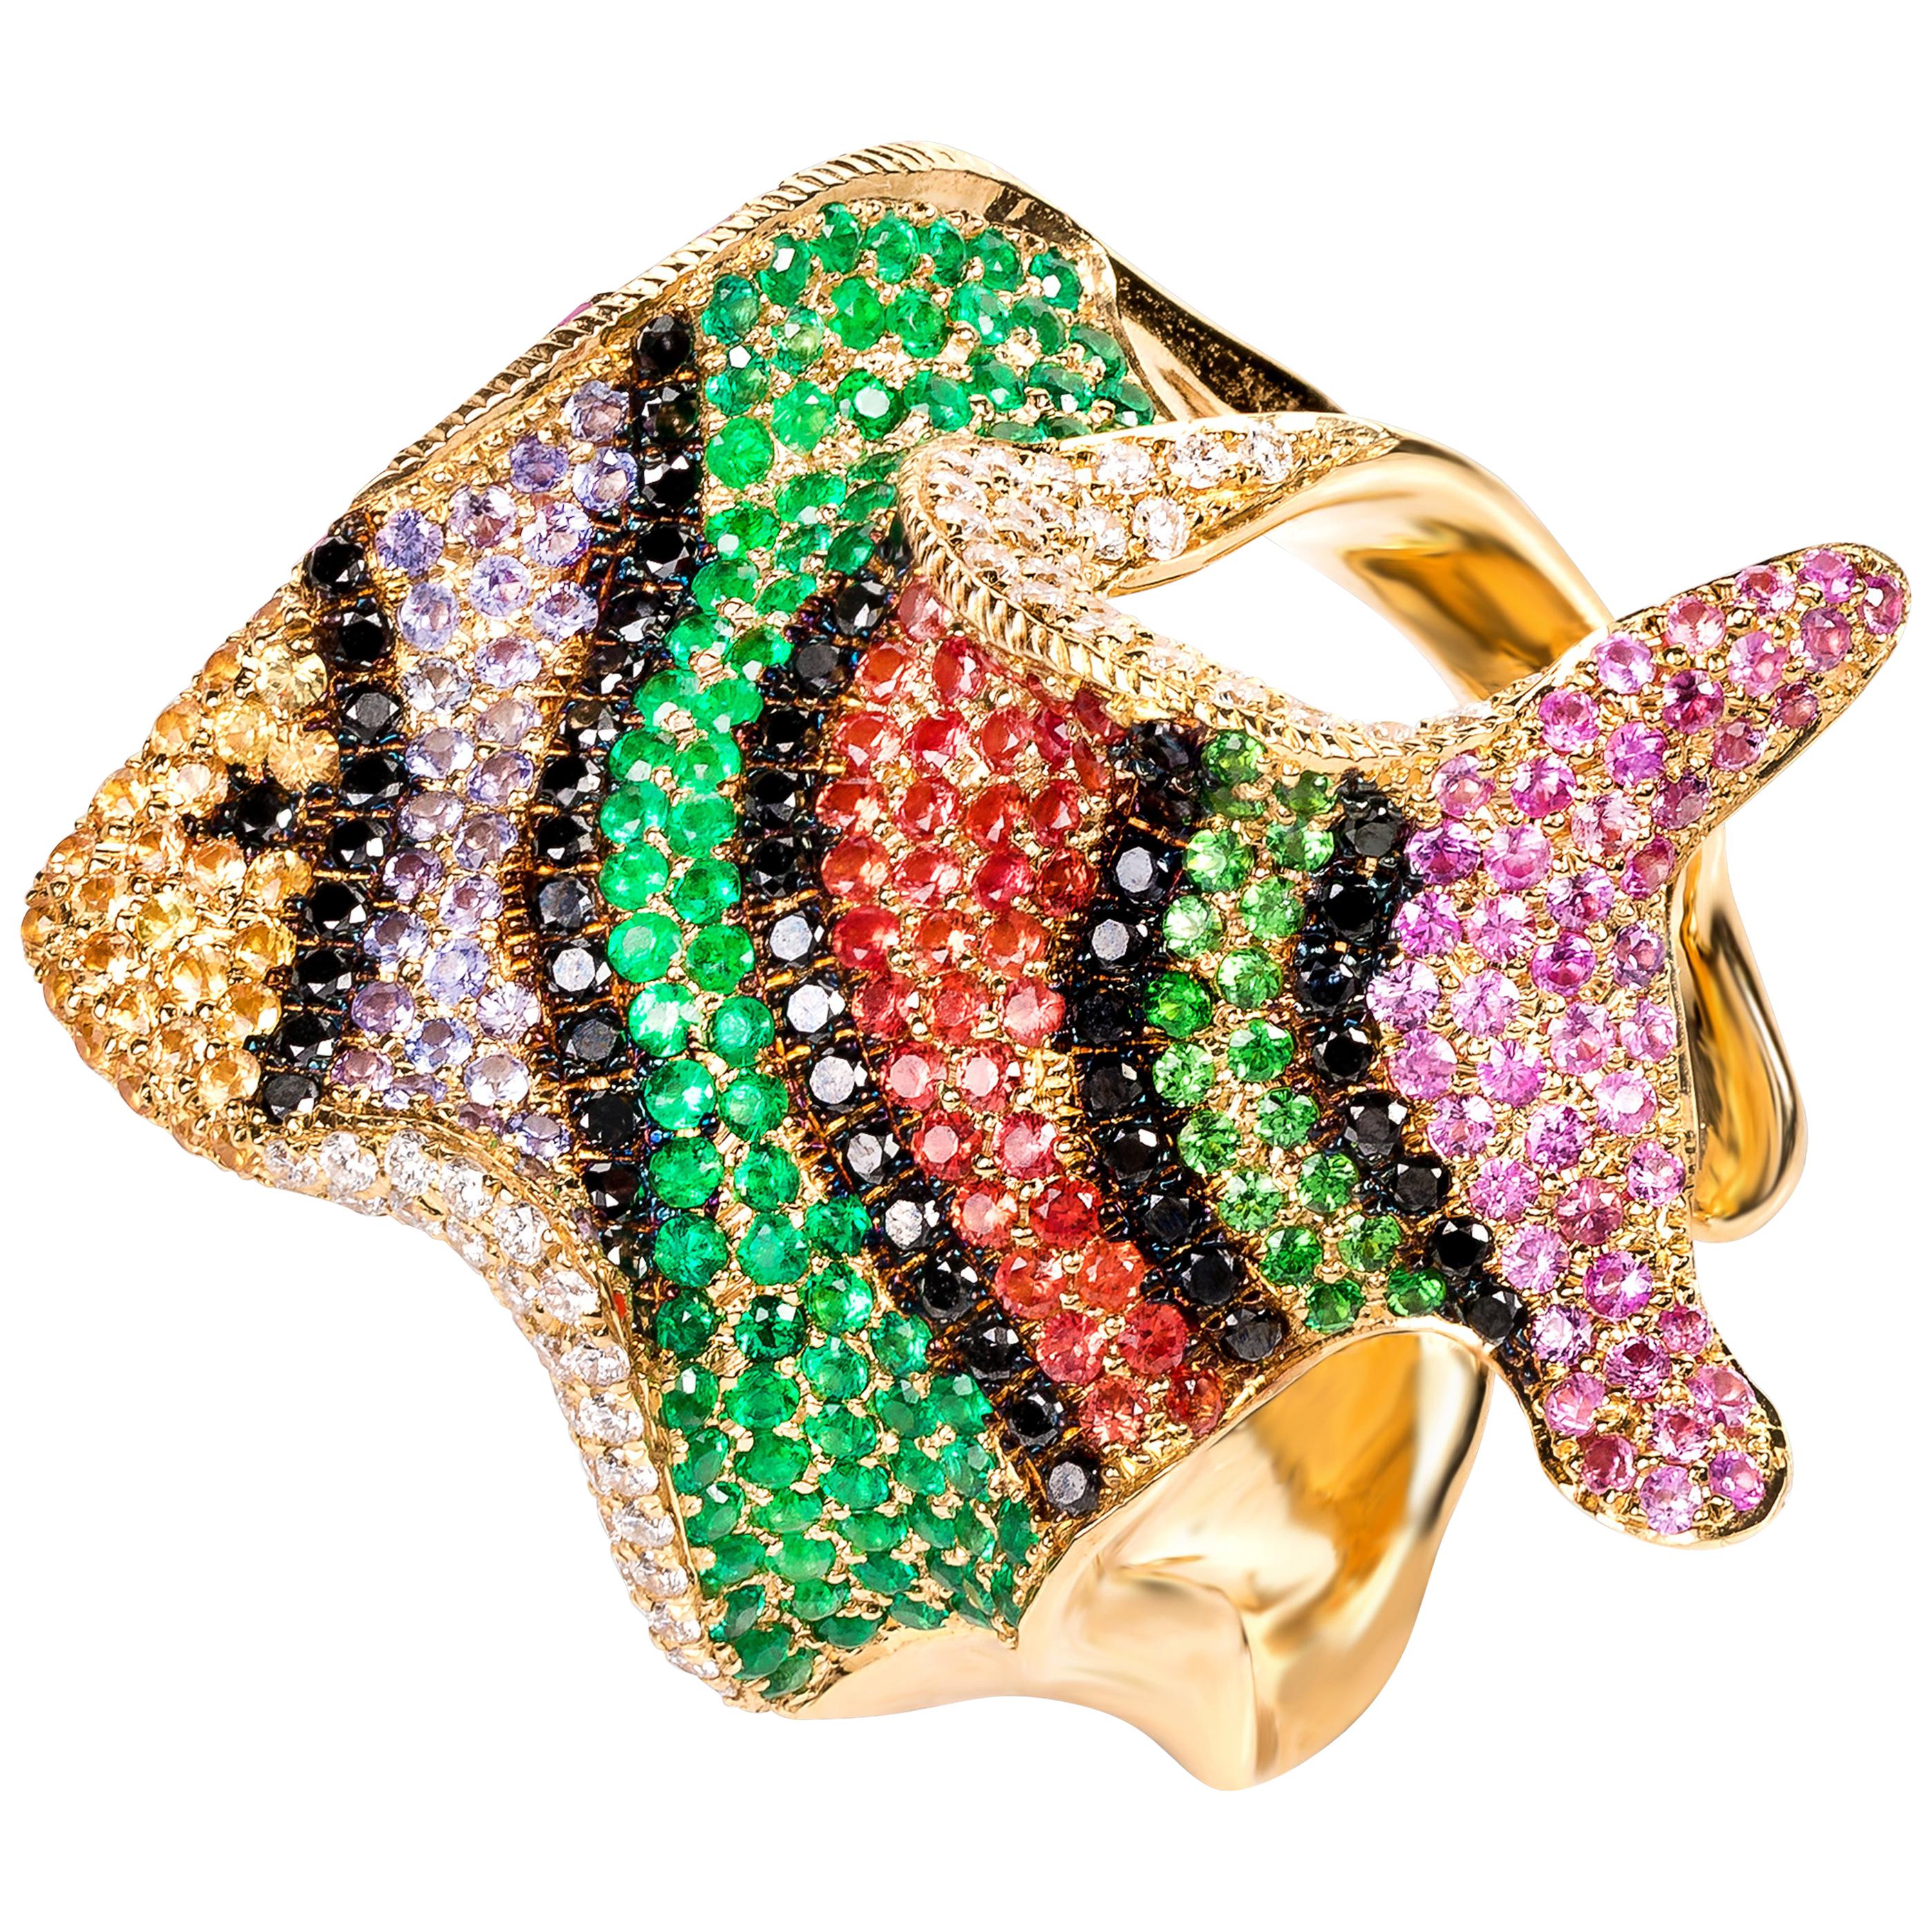 Contemporary "Clownfish" Multicolor Gemstone Cocktail Ring in Yellow Gold